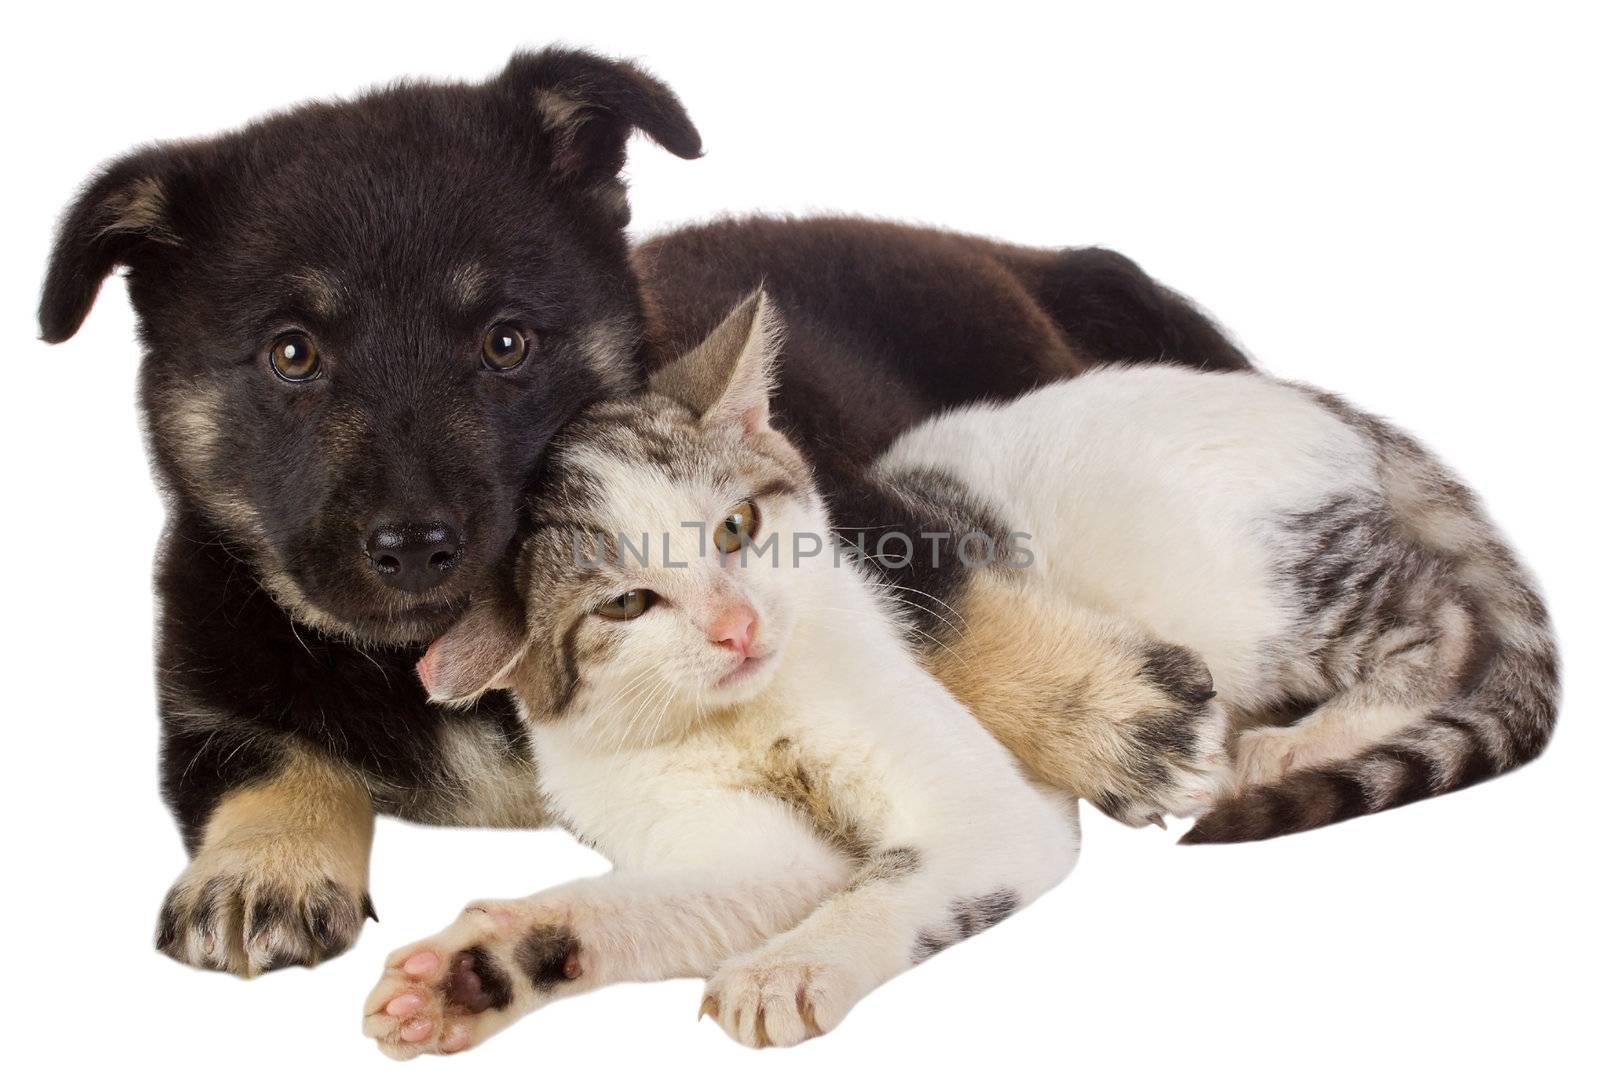 puppy and cat by Alekcey